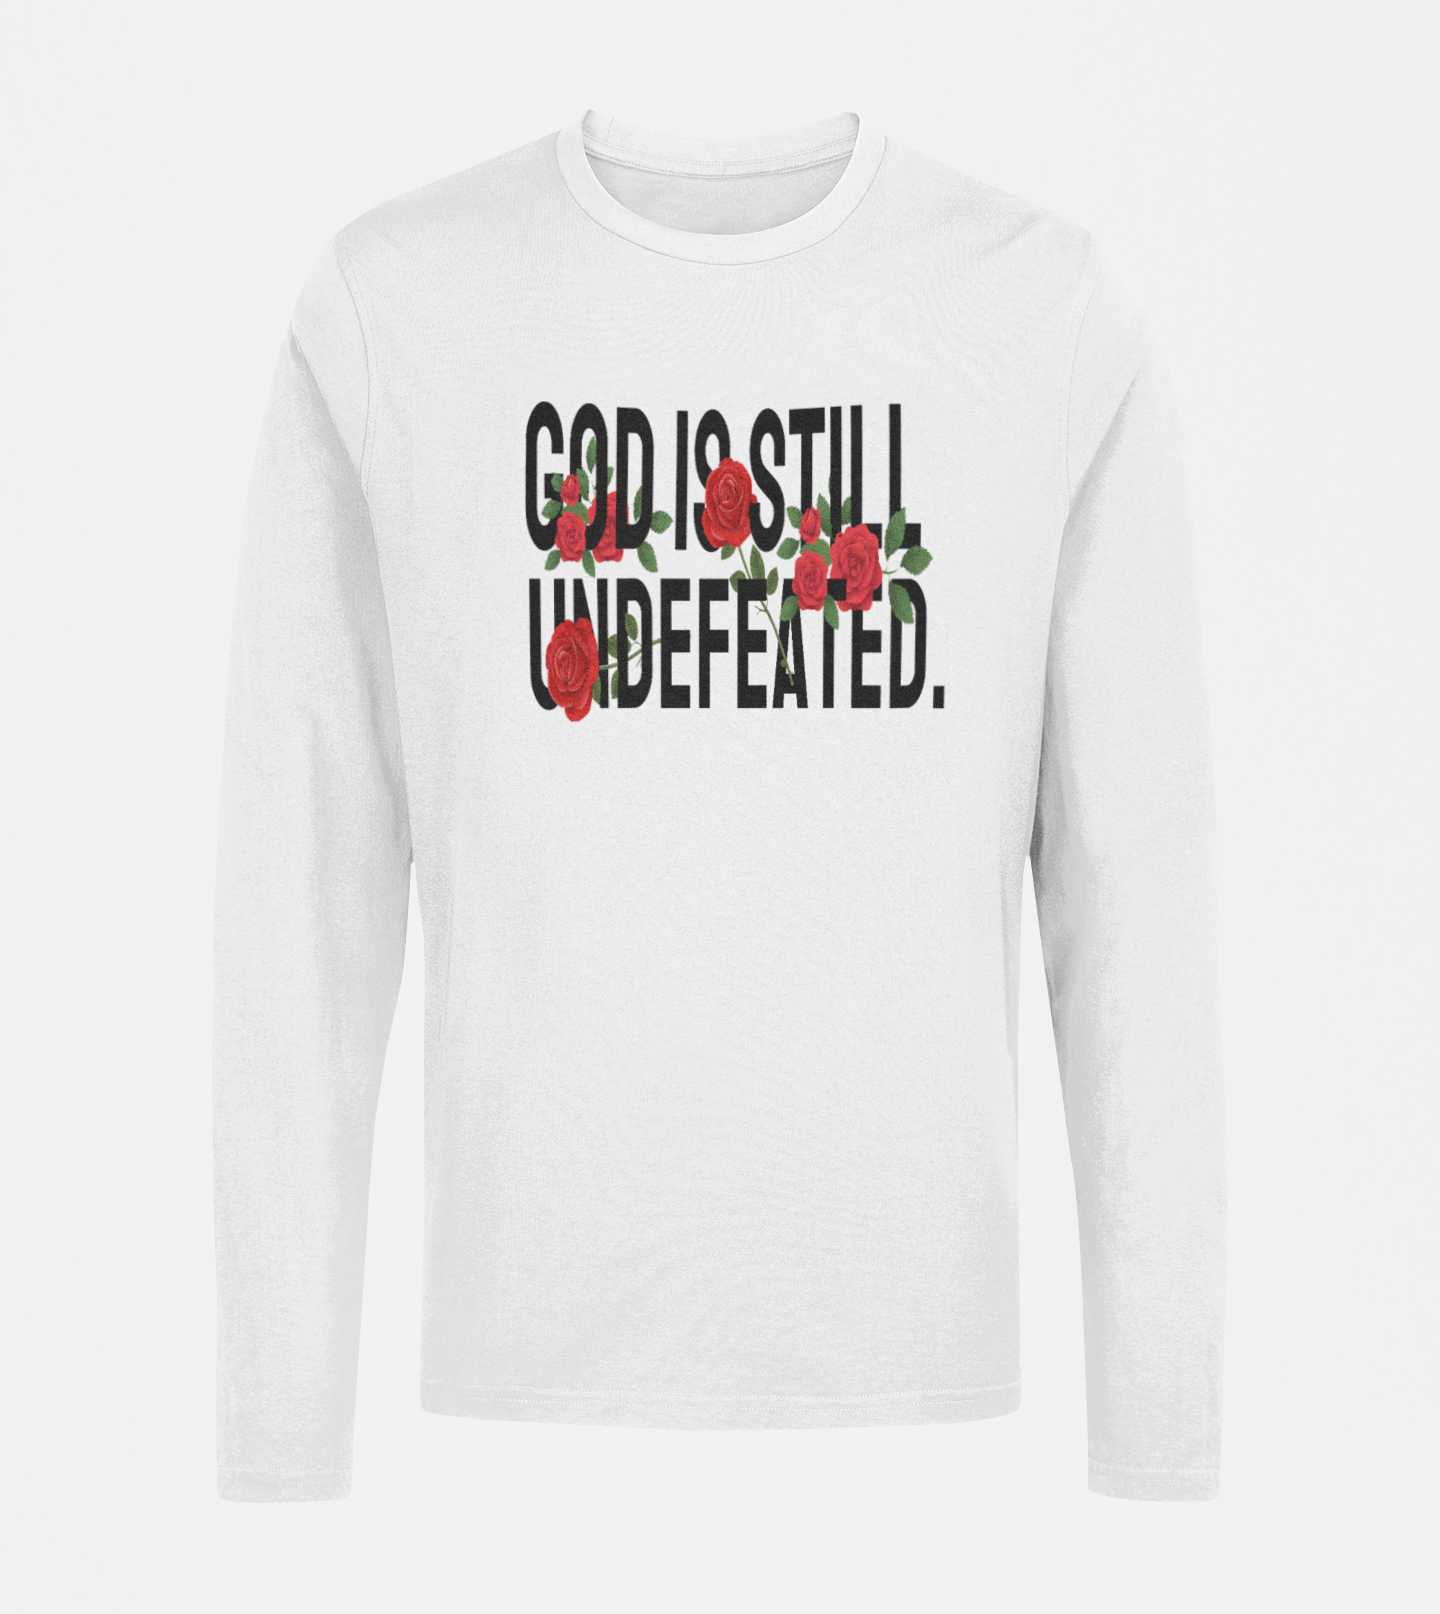 God Is Still Undefeated: Christian Graphic Tee (Black Lettering)